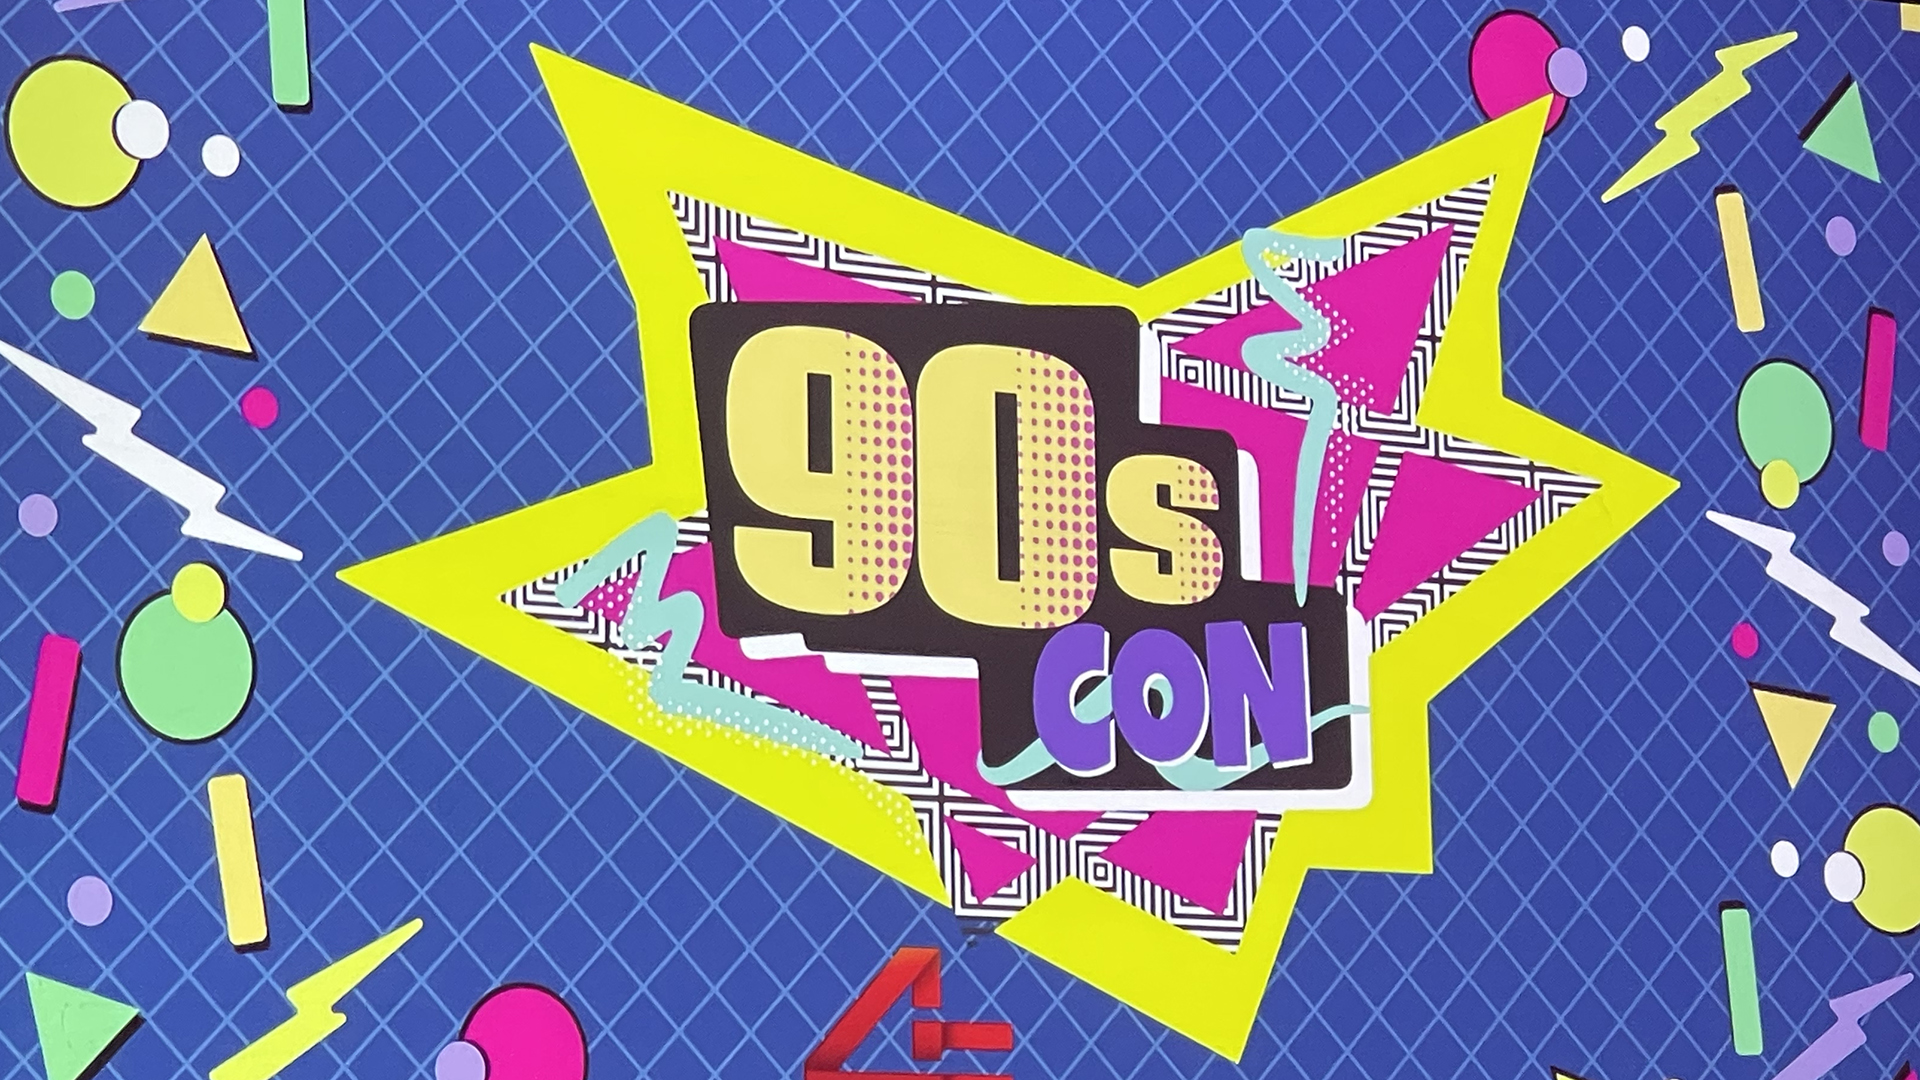 Fans React to ’90s Con and Meeting Their Favorite Stars